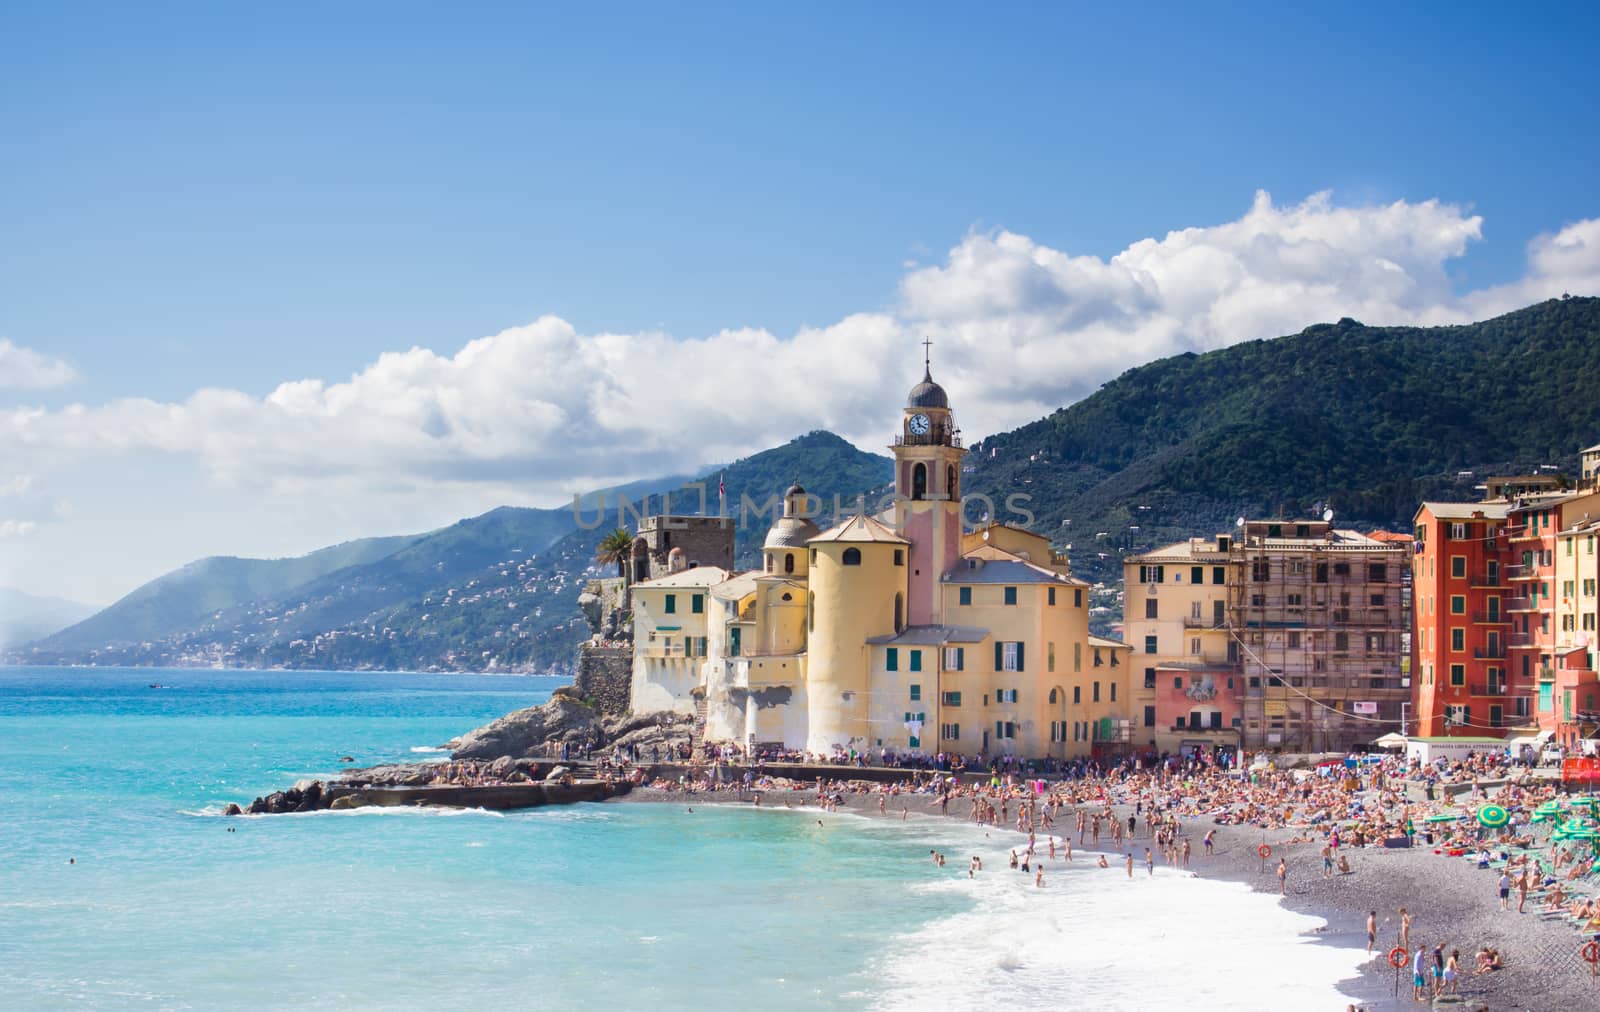 The town of Camogli on the banks of the Ligurian coast in Italy